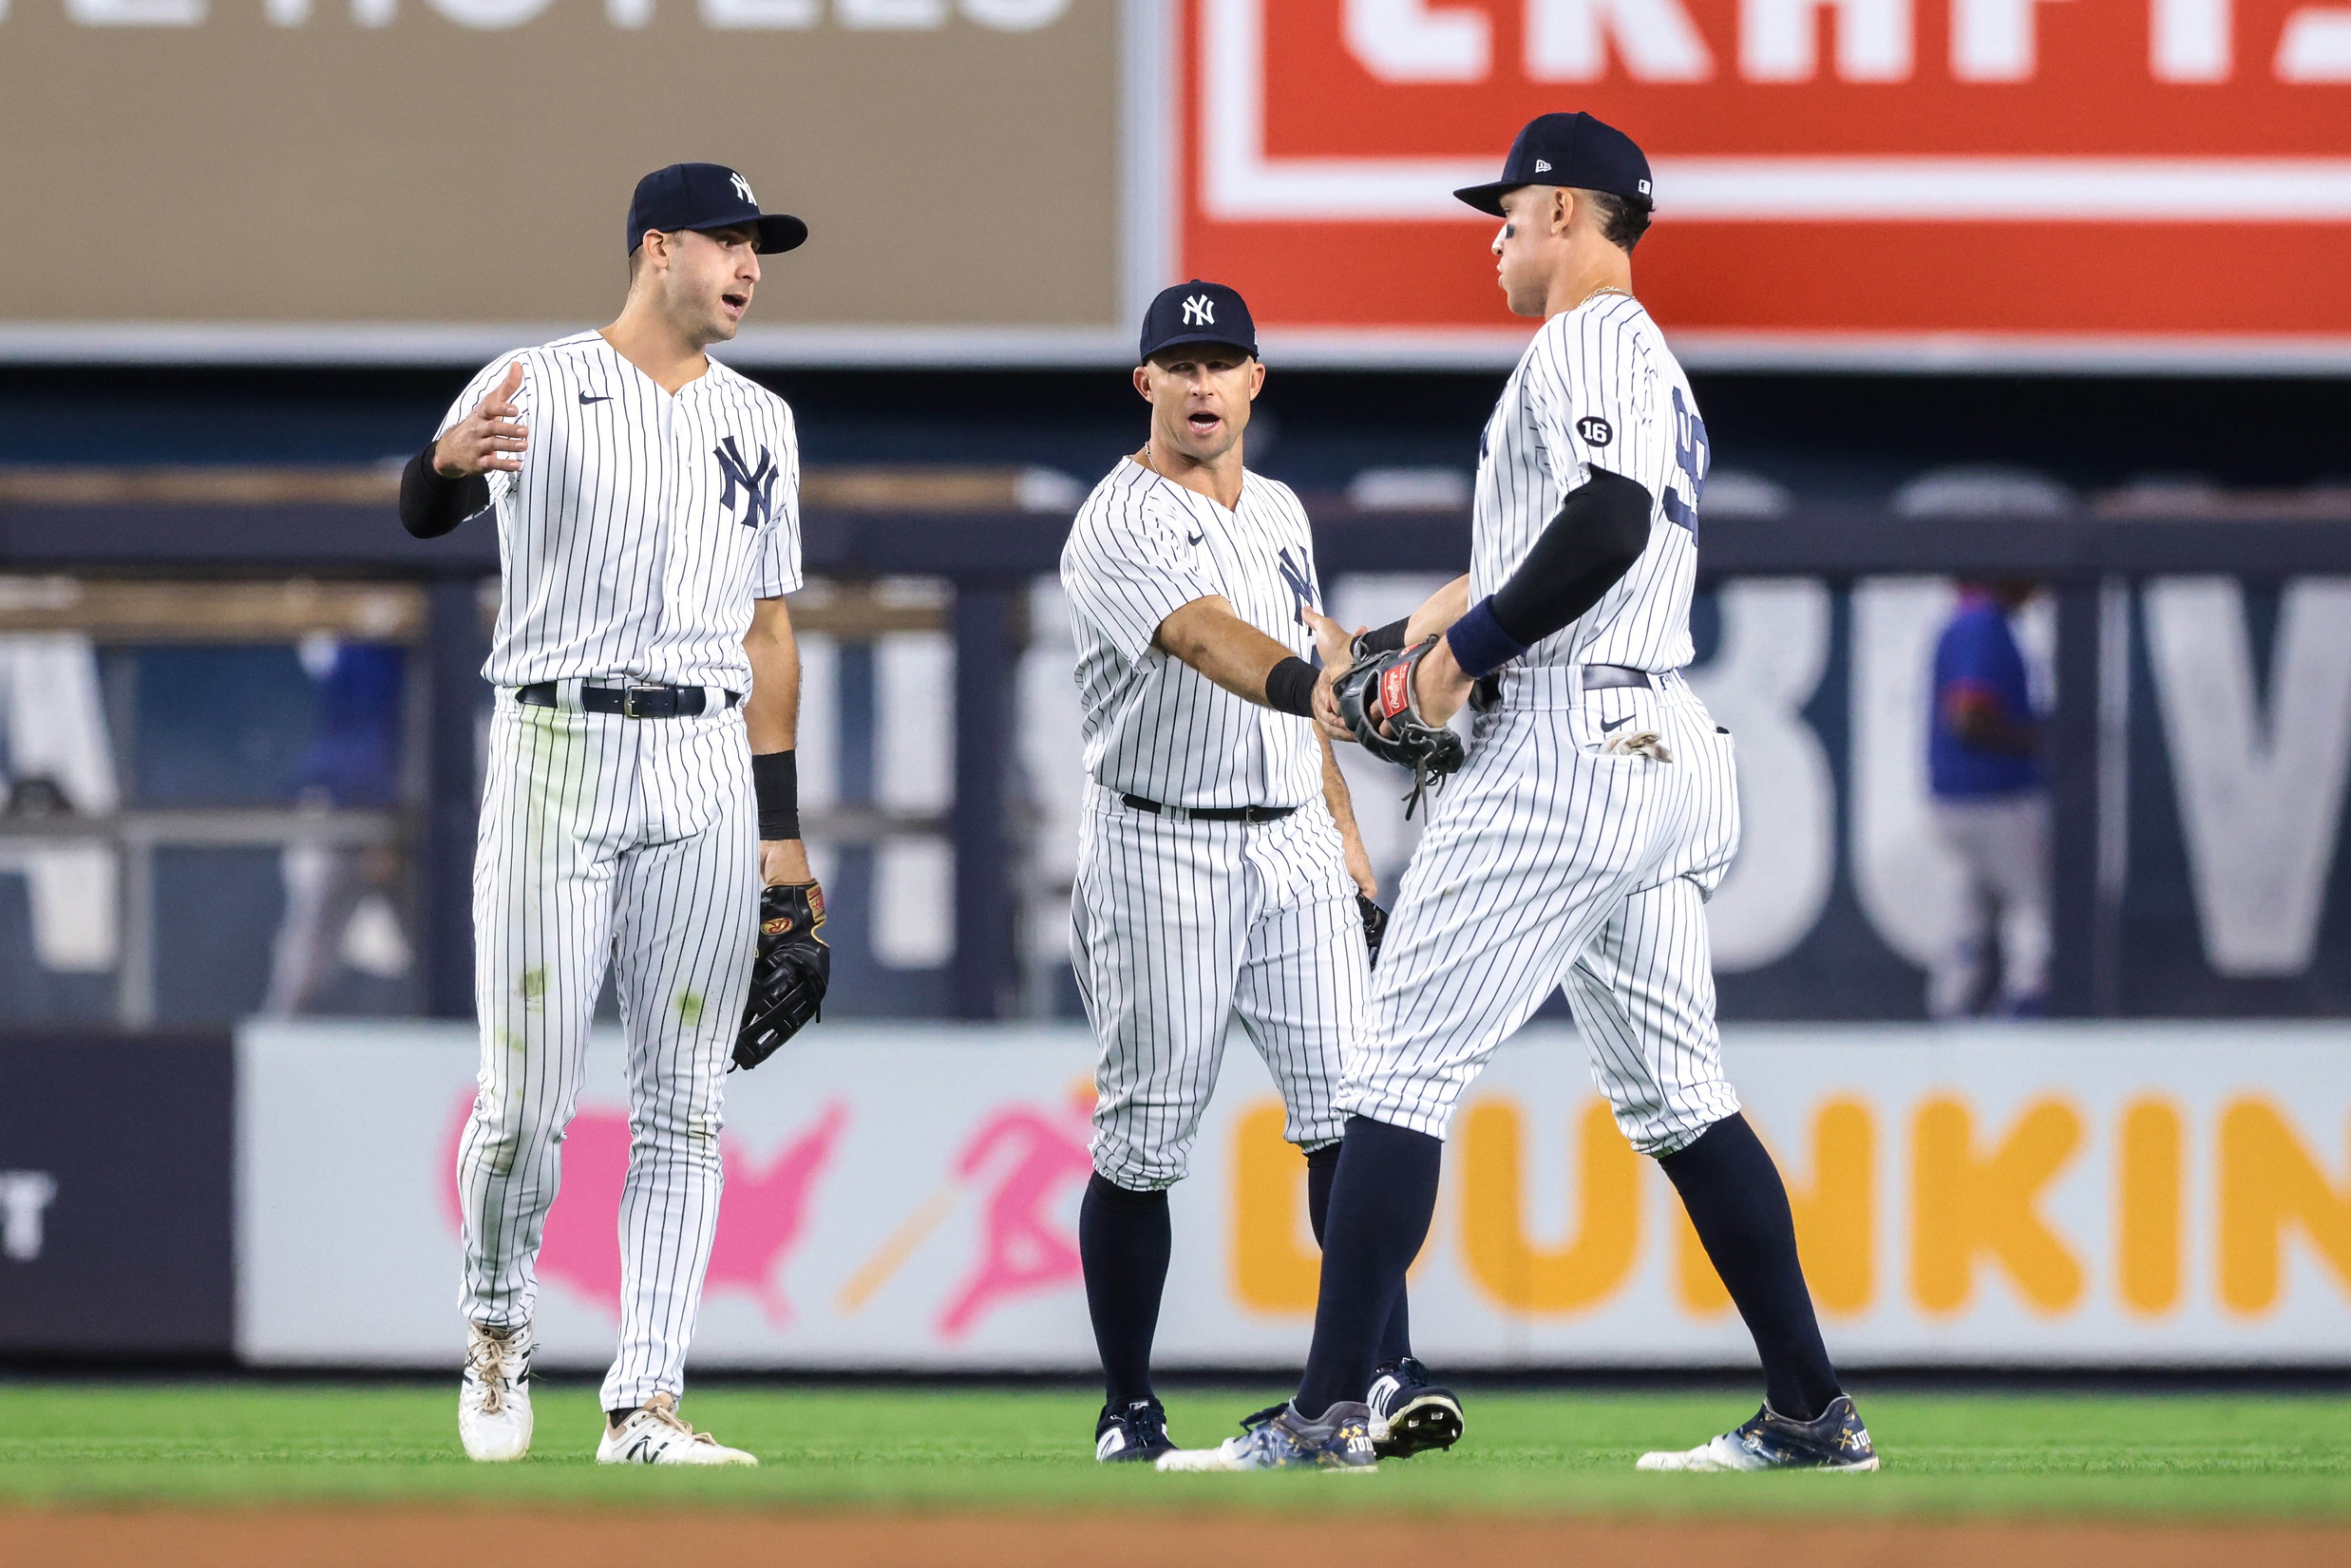 Yankees outfielders Aaron Judge, Joey Gallo recognized for defense